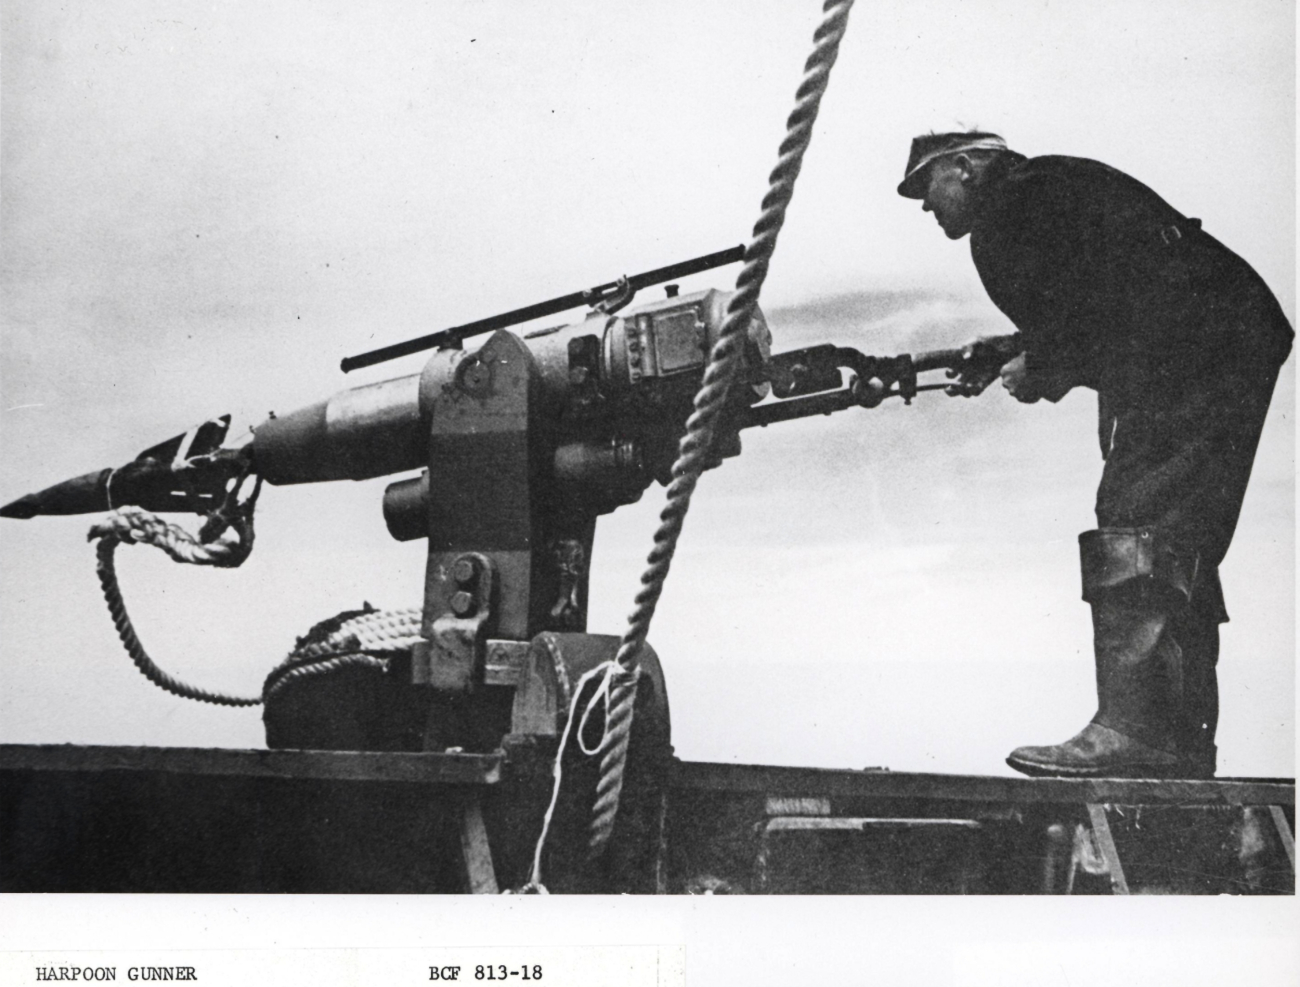 Harpoon gunner in position to fire harpoon into whale